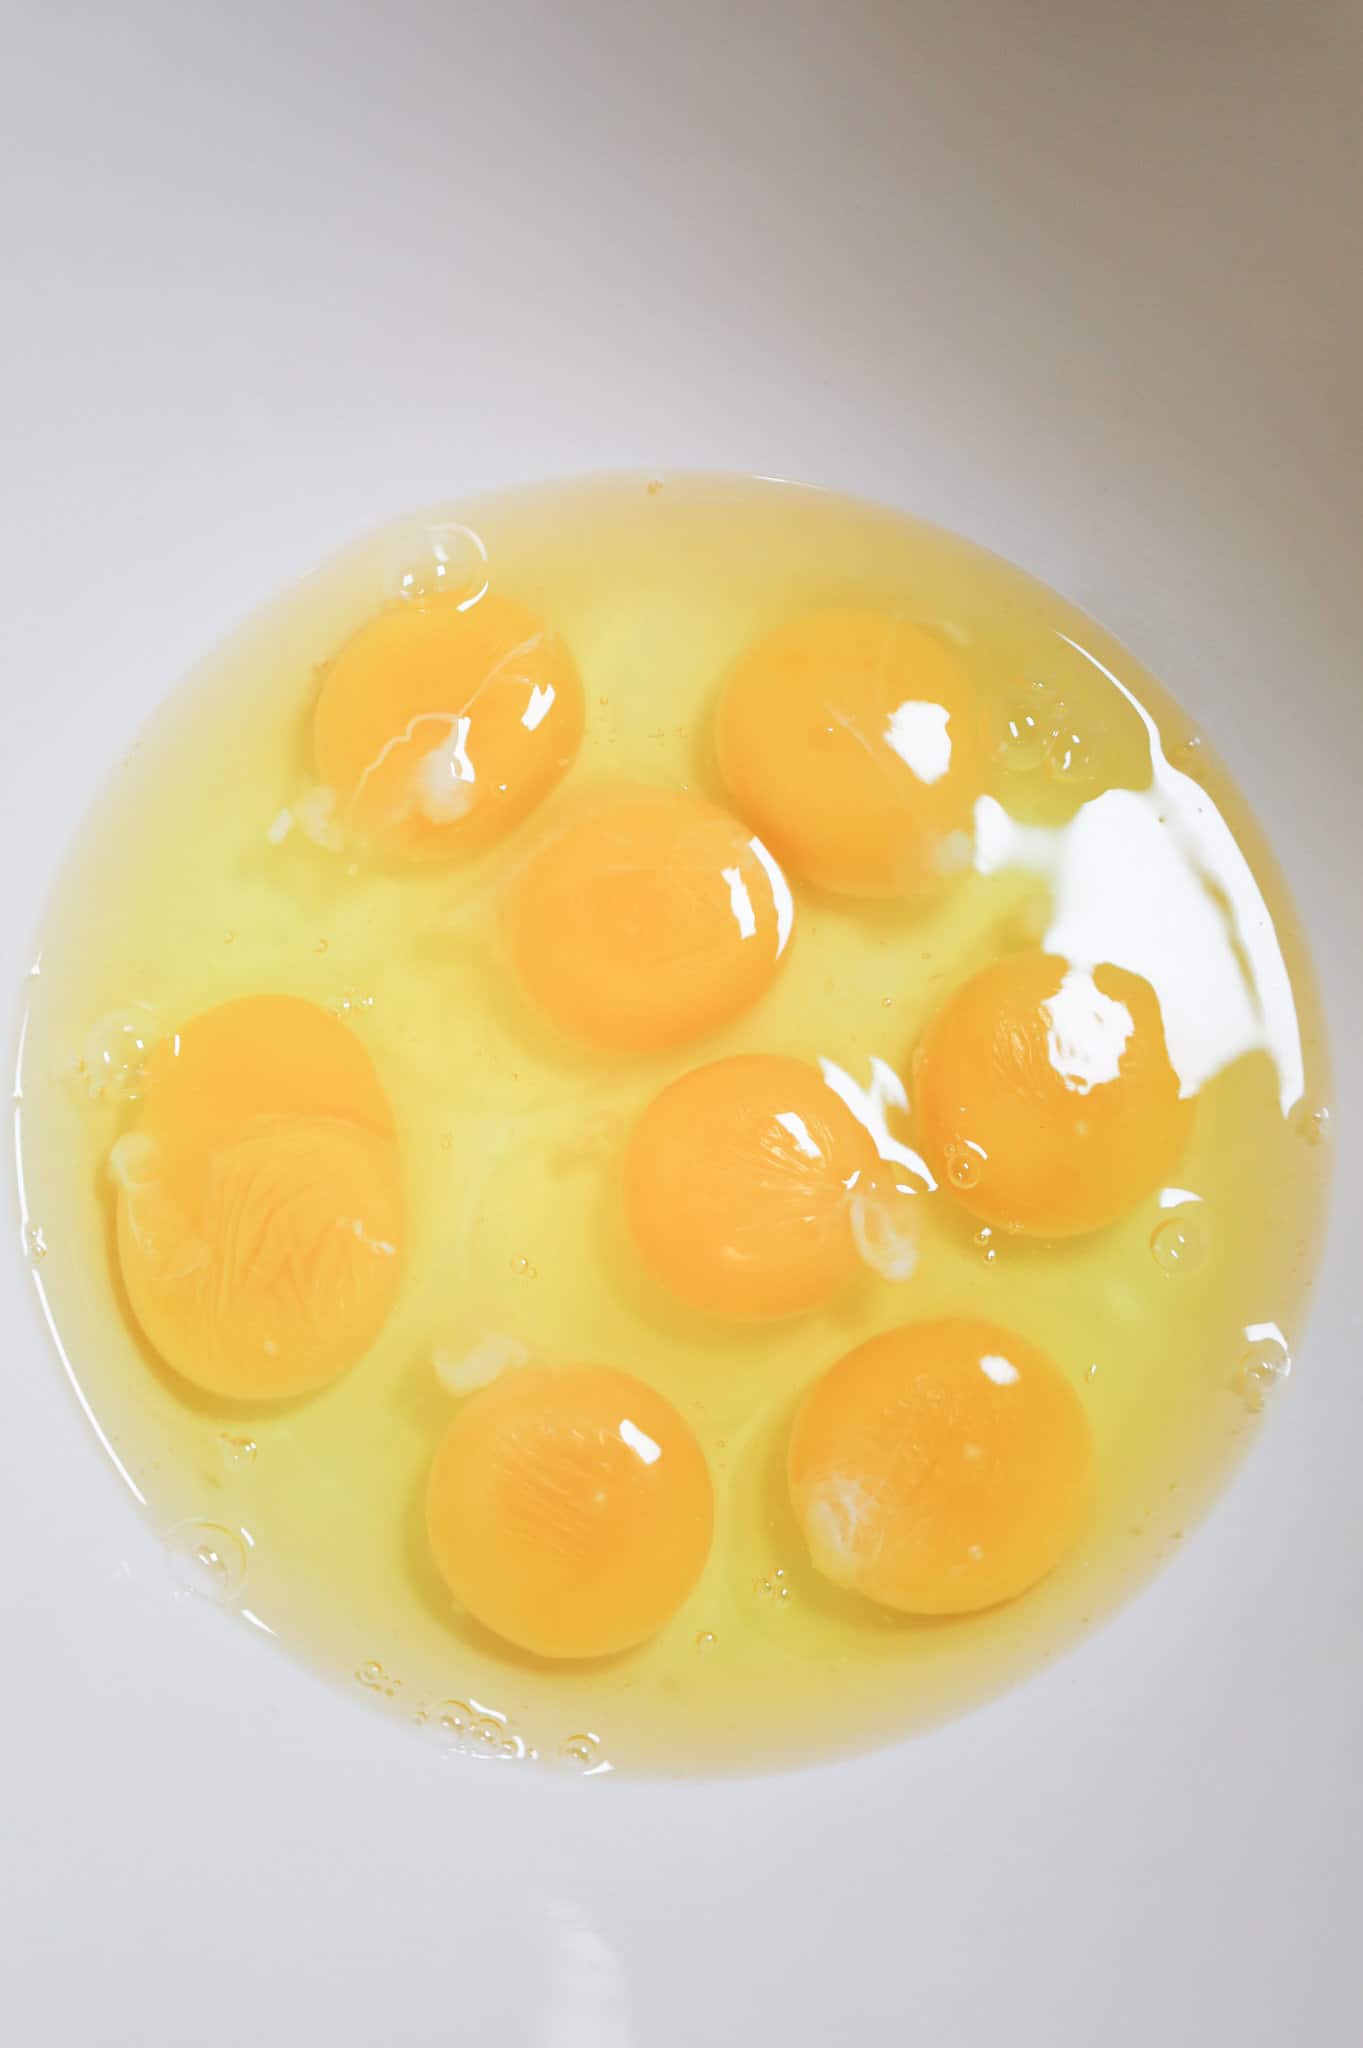 eggs in a mixing bowl